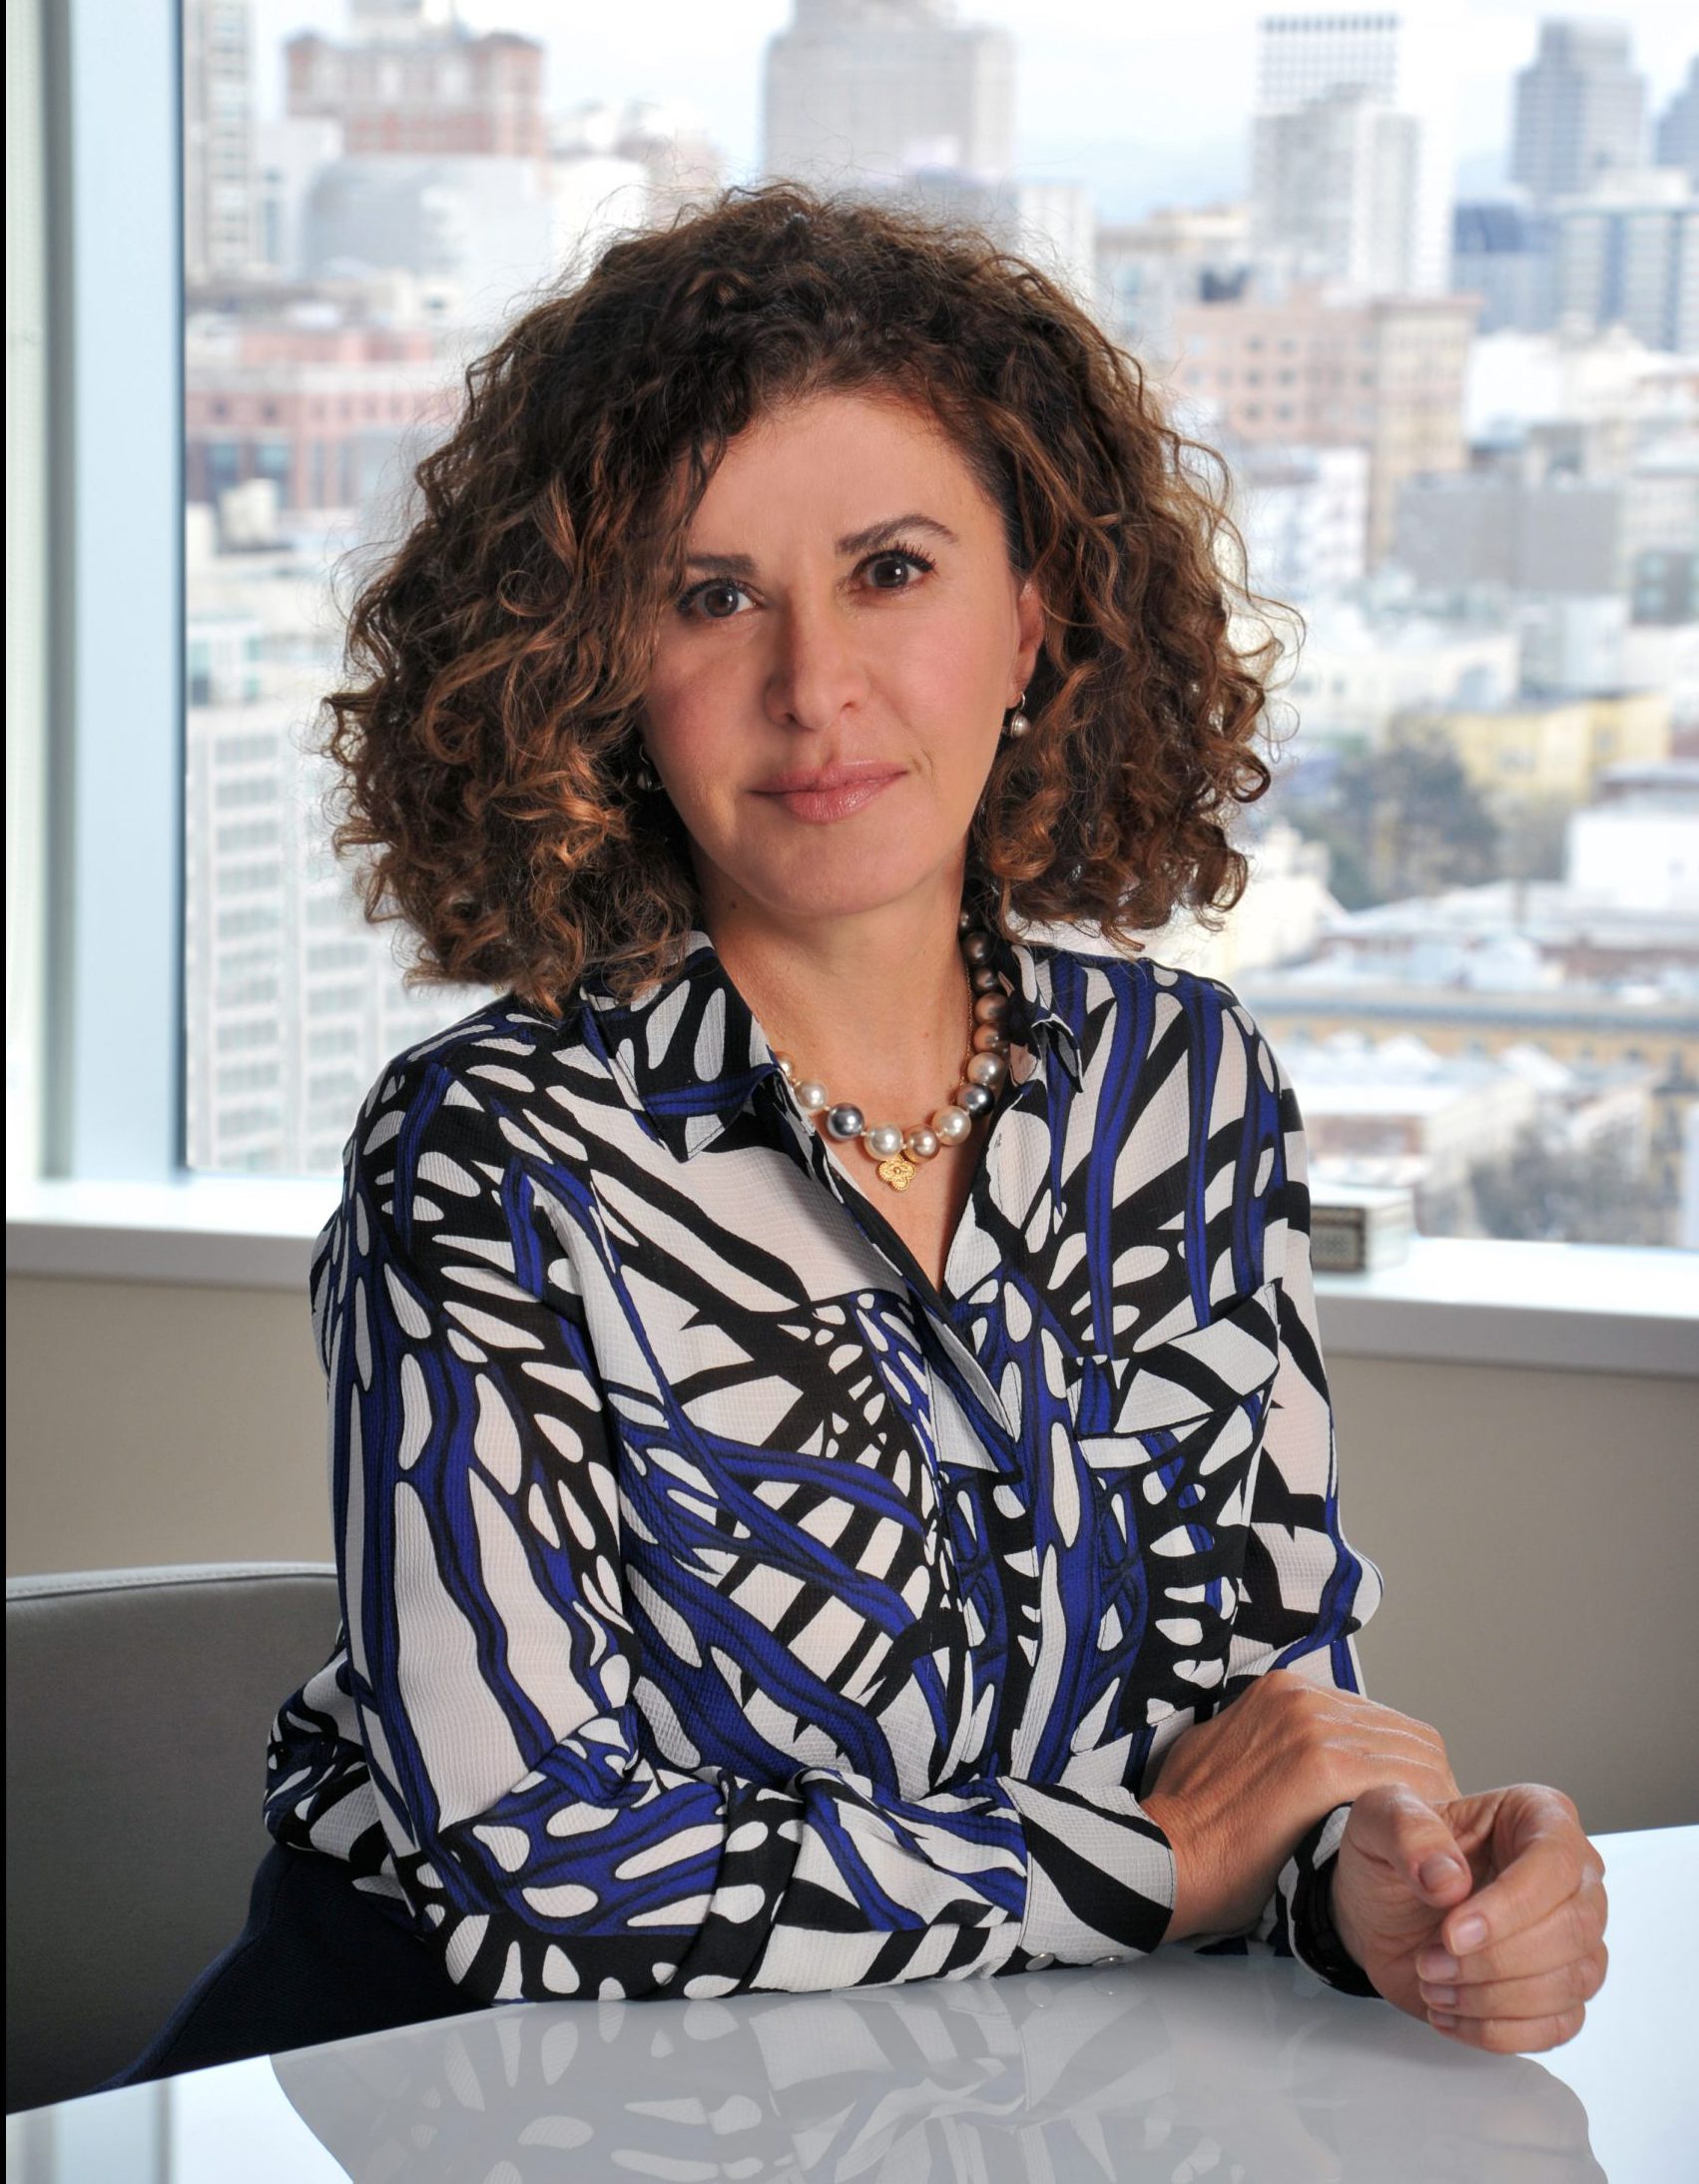 A woman with a curly hair sits at a desk